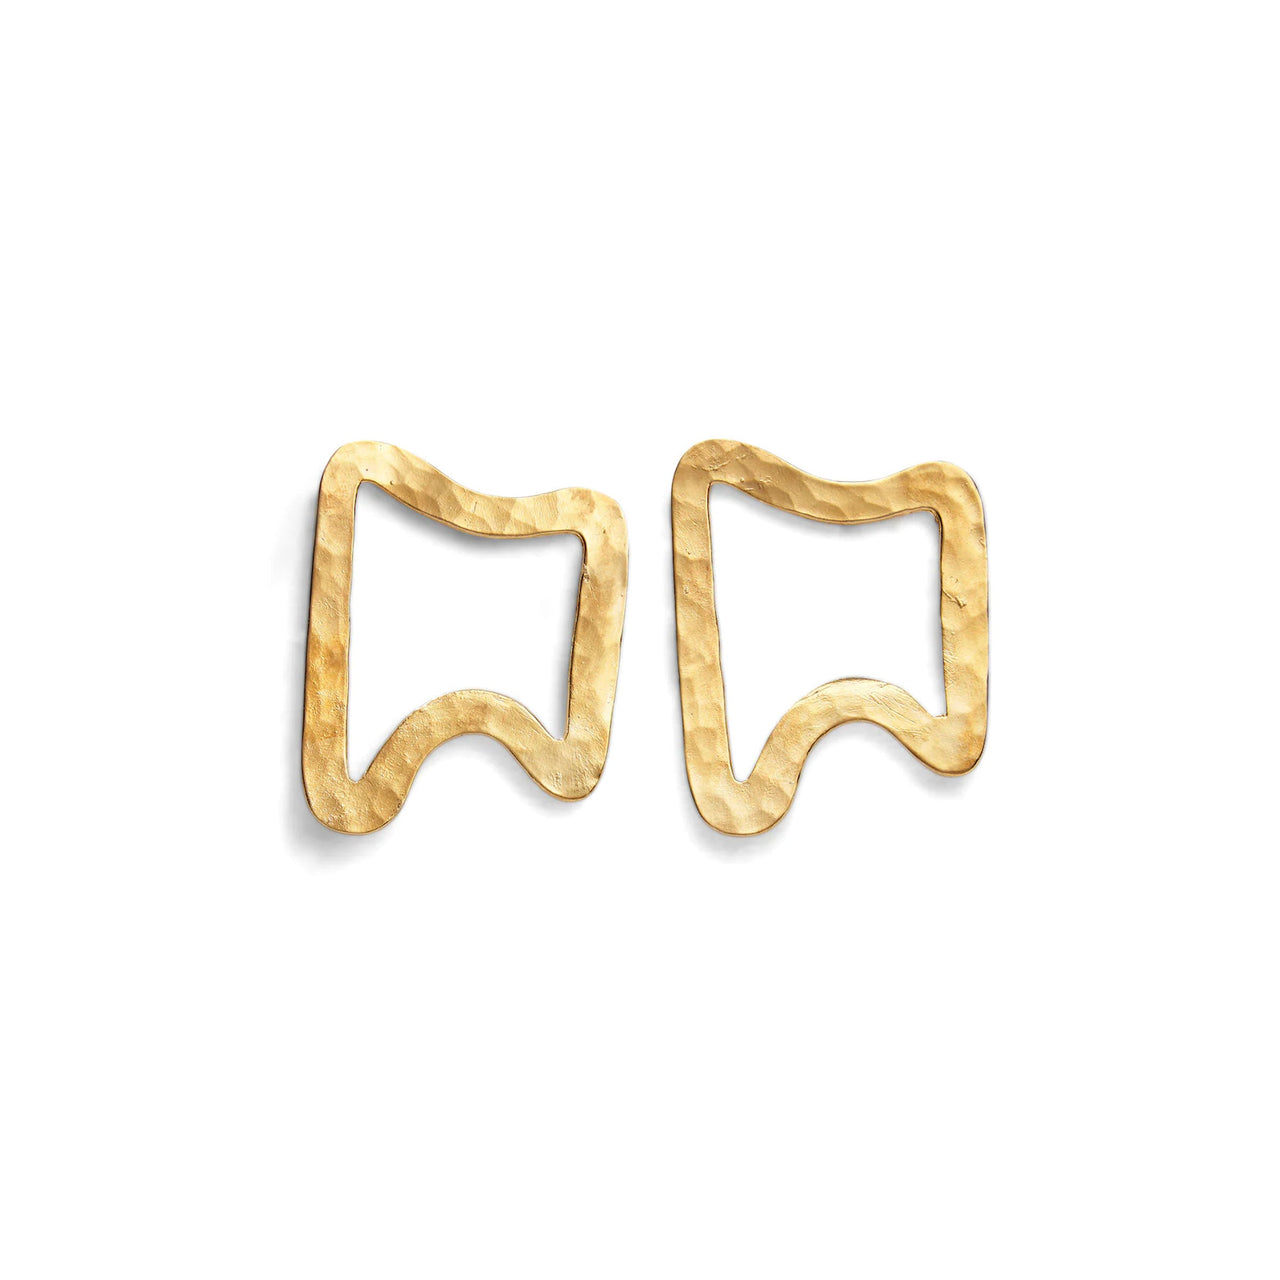 Hammered Abstract Single Earrings - Gold